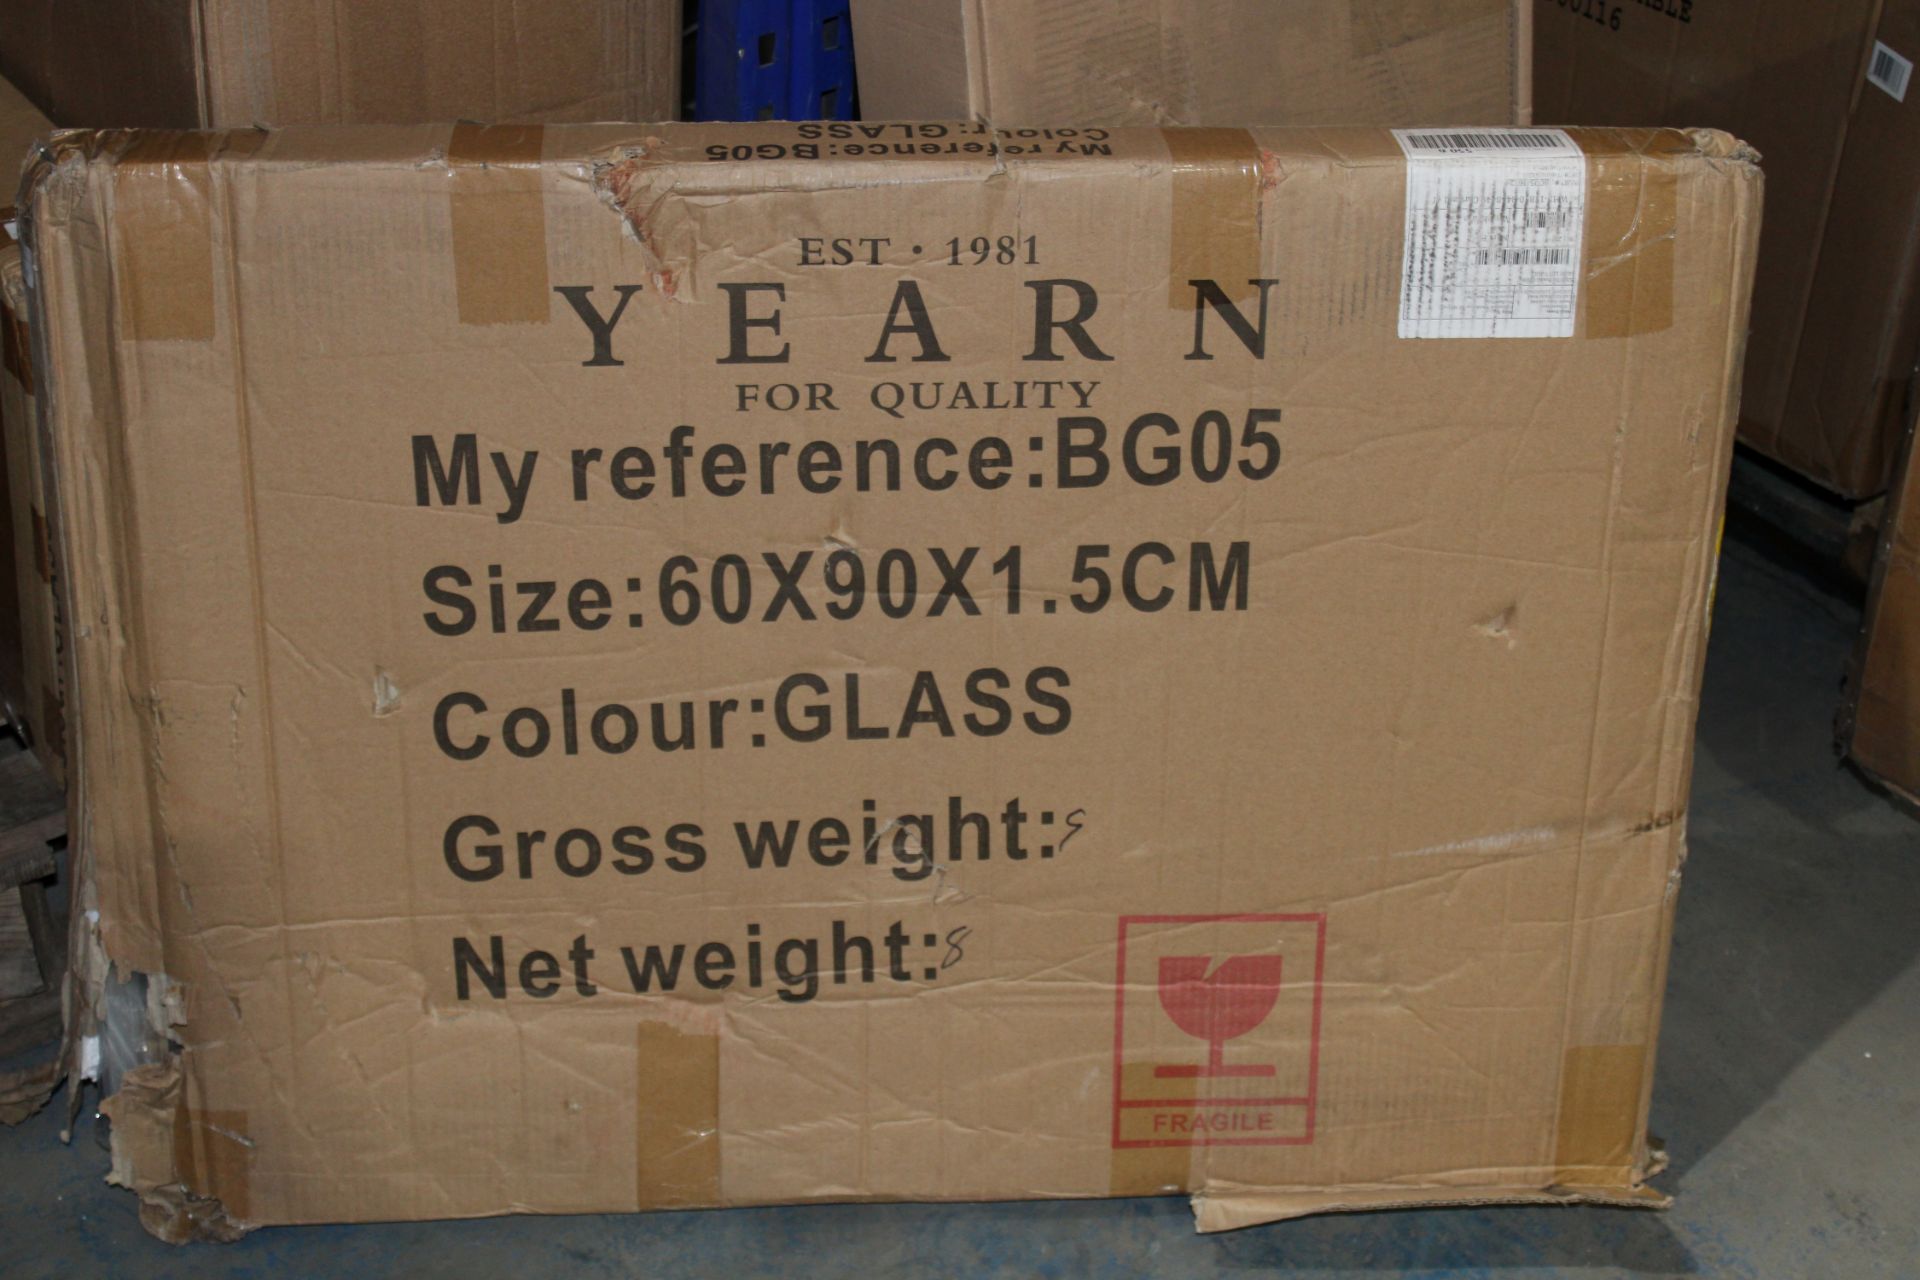 BOXED YEARN BG05 60 X 90 X 1.5CM GLASS MIRROR RRP £108.00 (AS SEEN IN WAYFAIR)Condition - Image 2 of 2